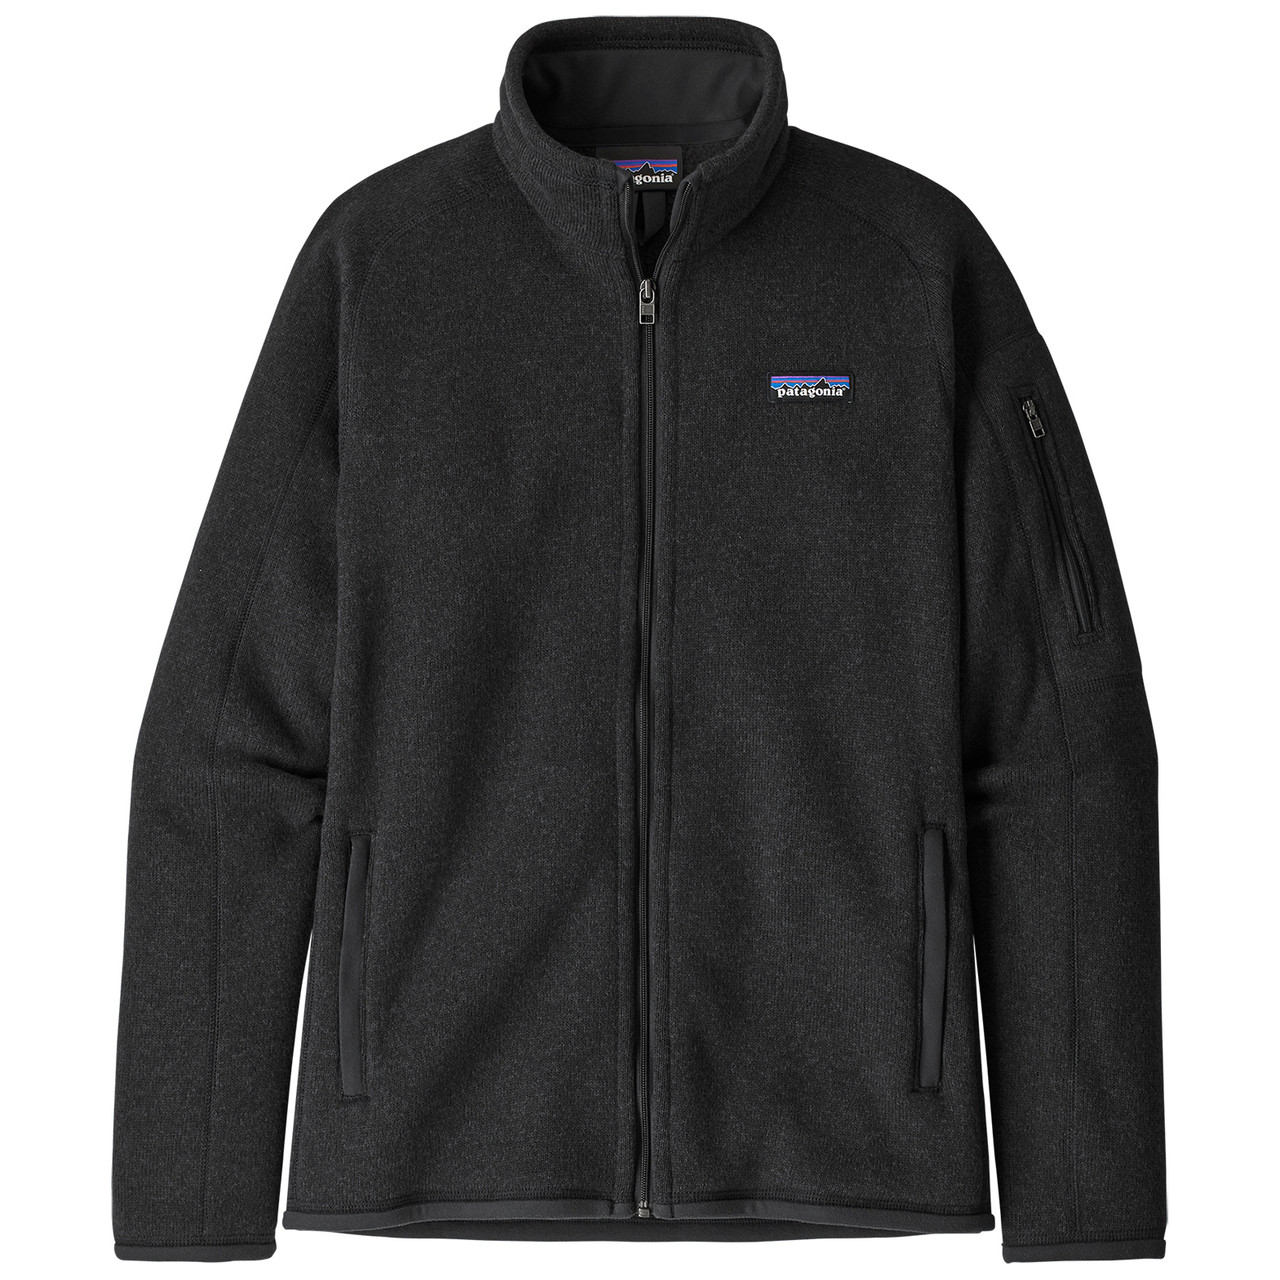 Patagonia W's Better Sweater Jacket - Black - Small